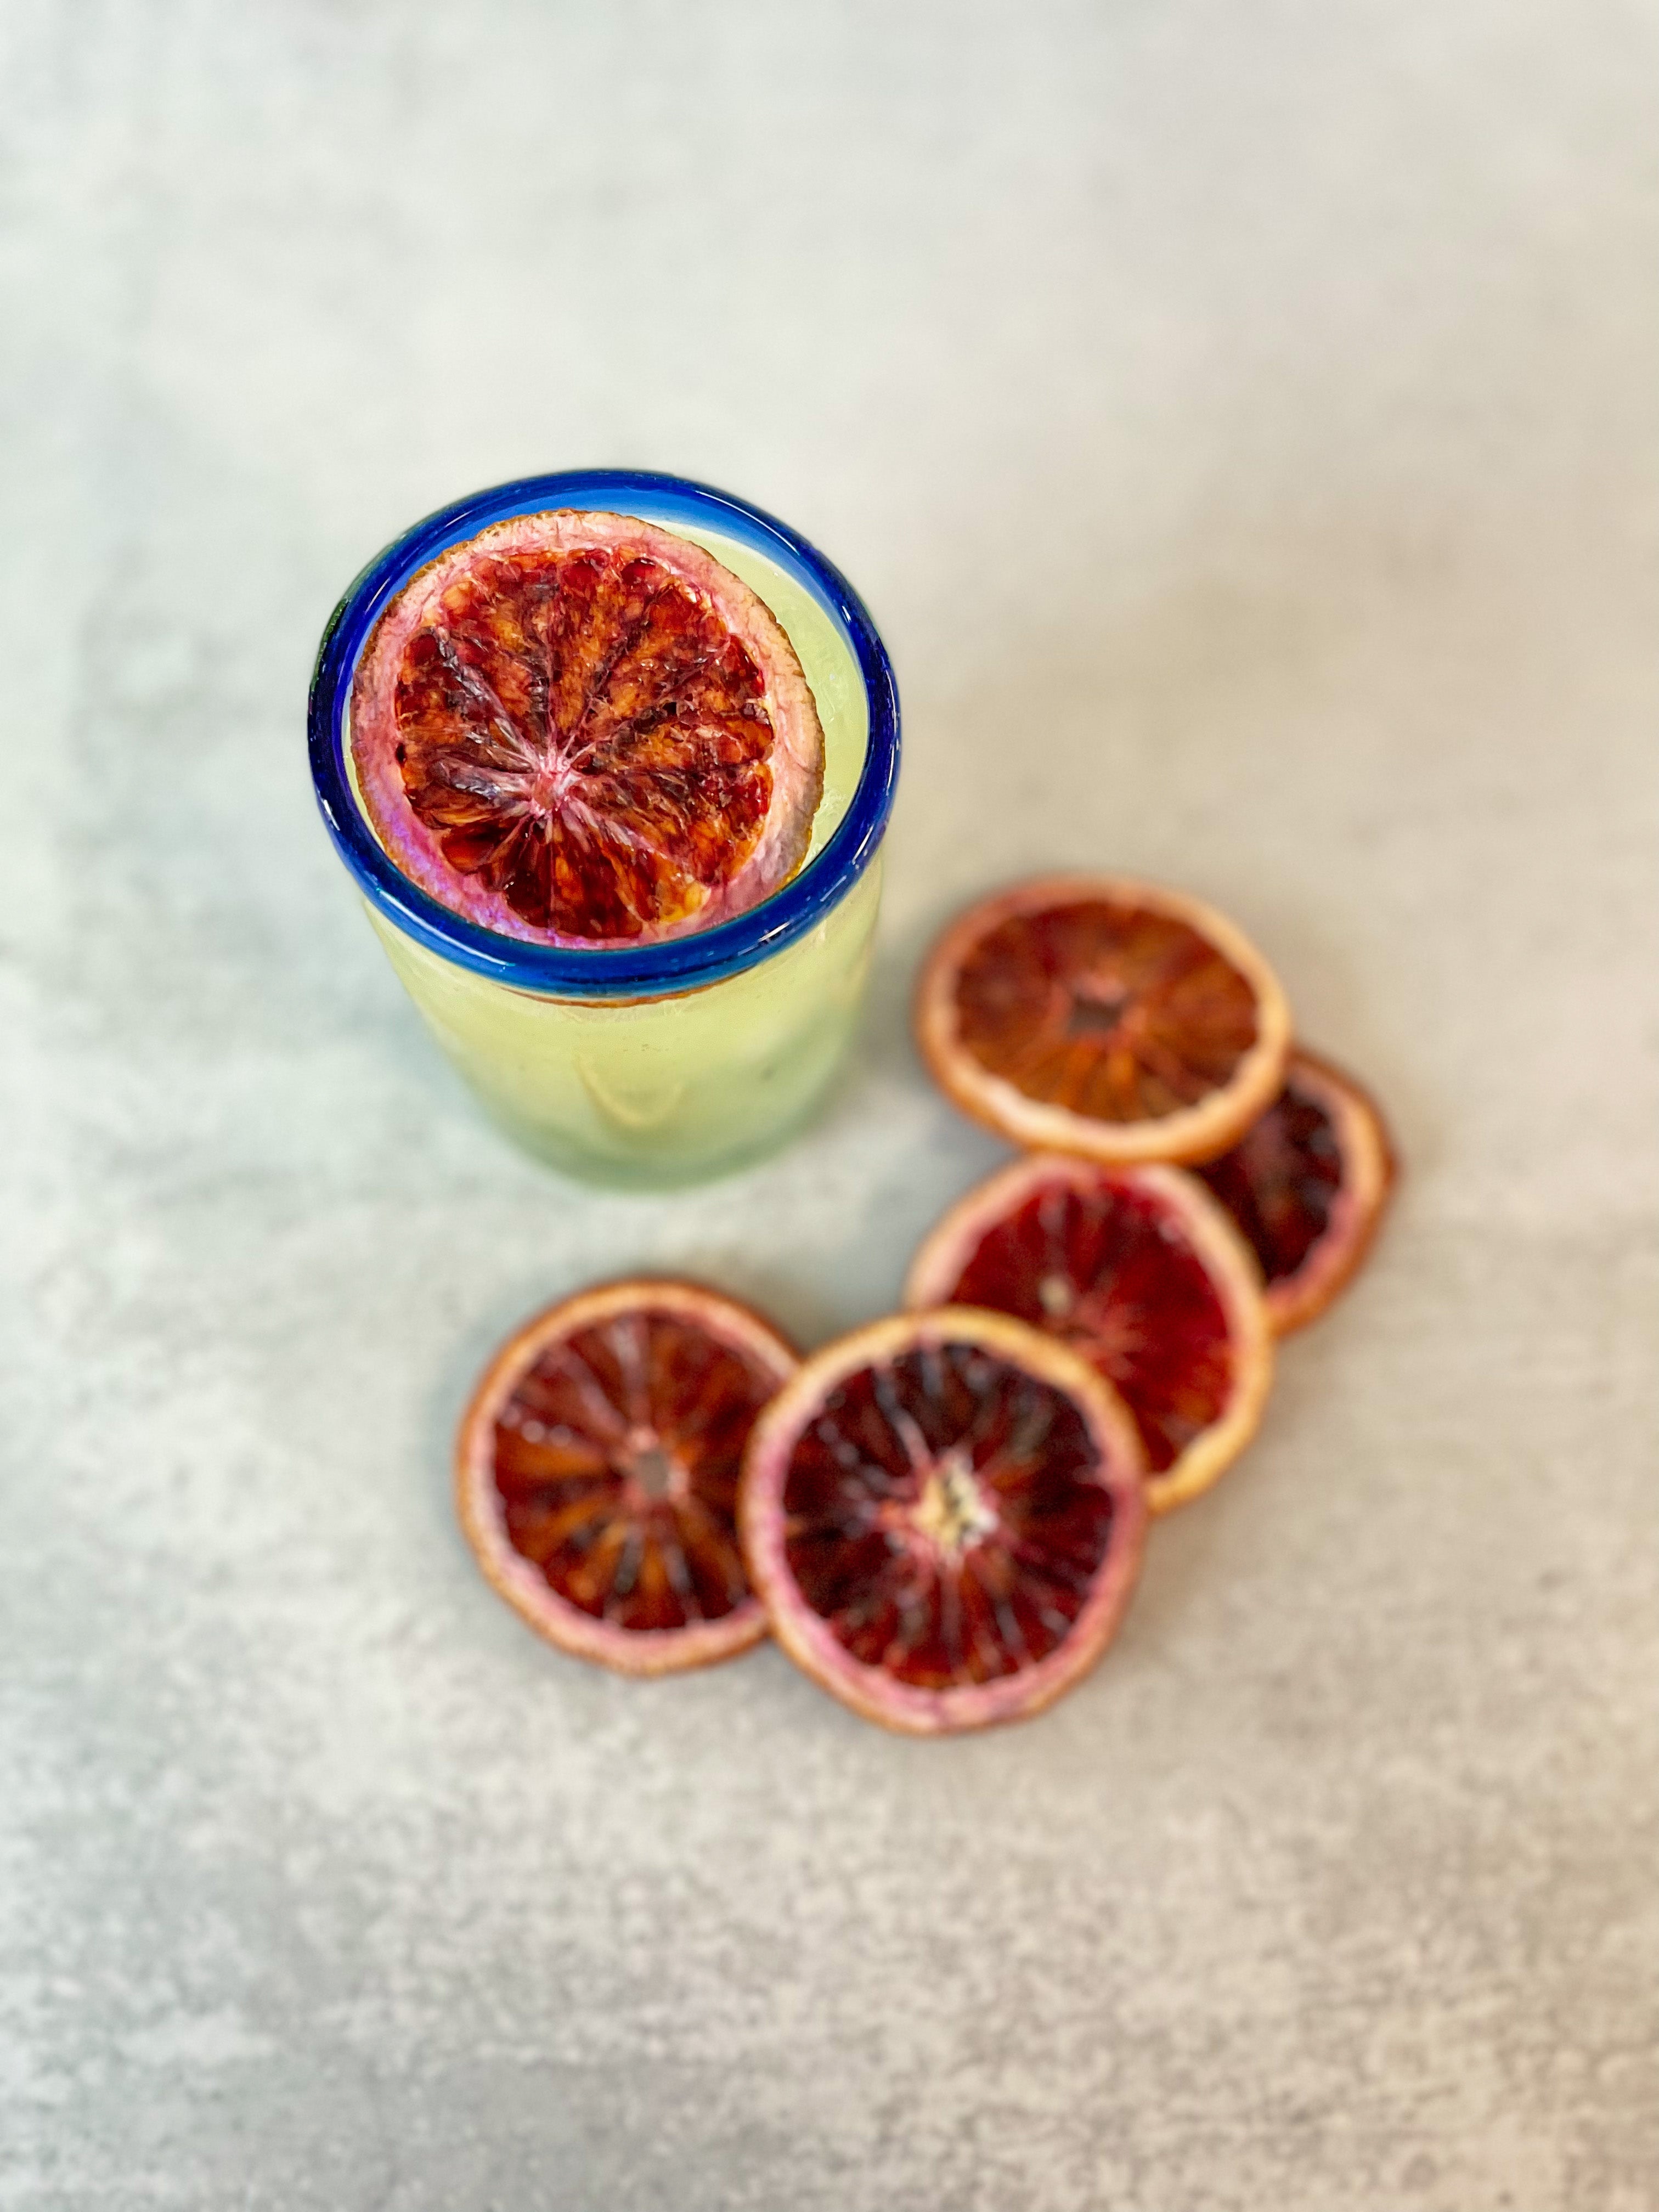 InBooze Dehydrated Fruit Cocktail Garnishes - Perfect for your home bar!